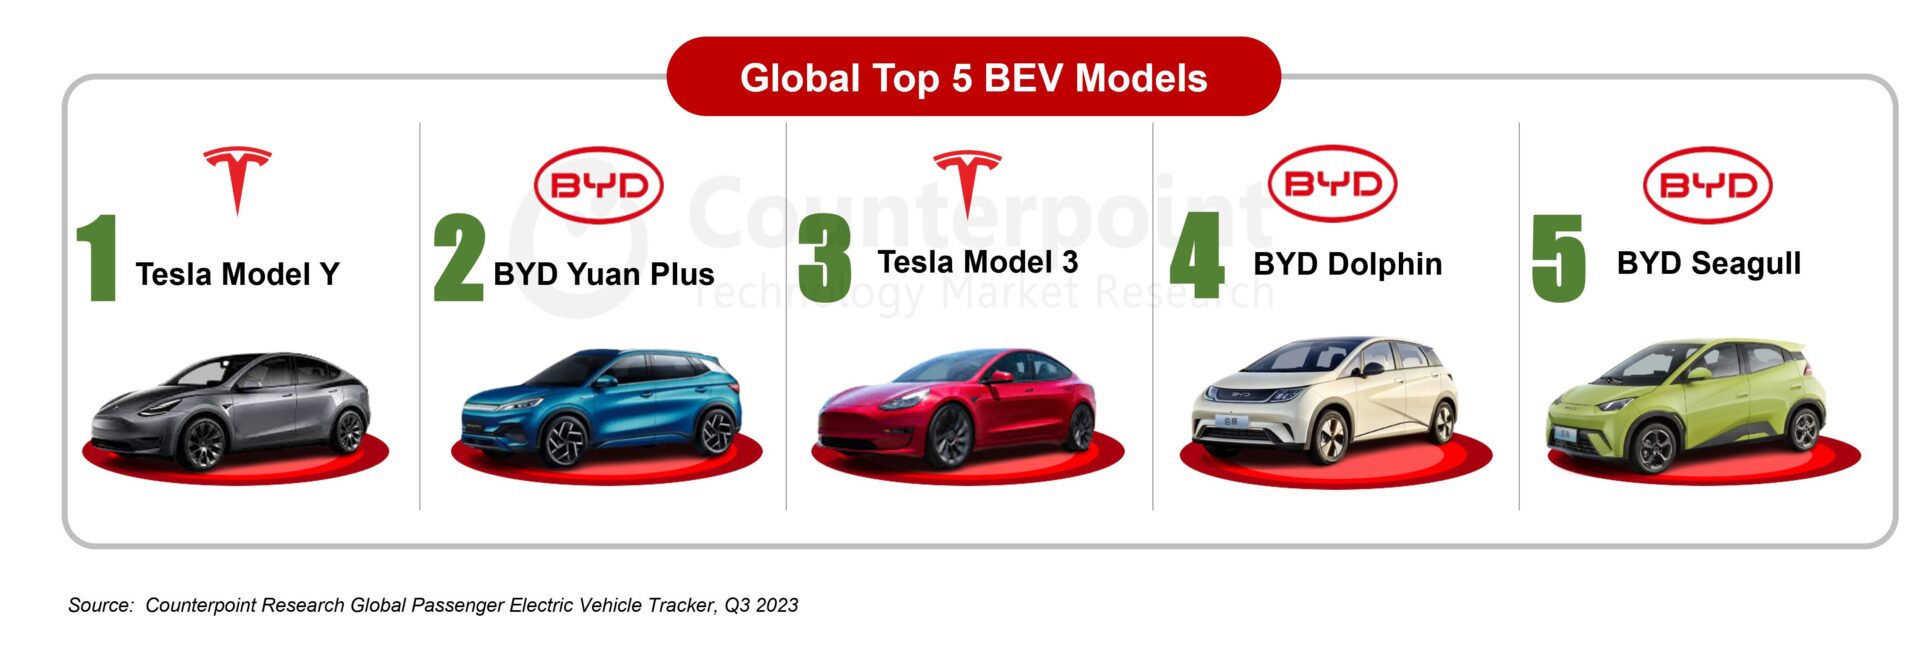 The top 5 BEV models globally in Q3 2023